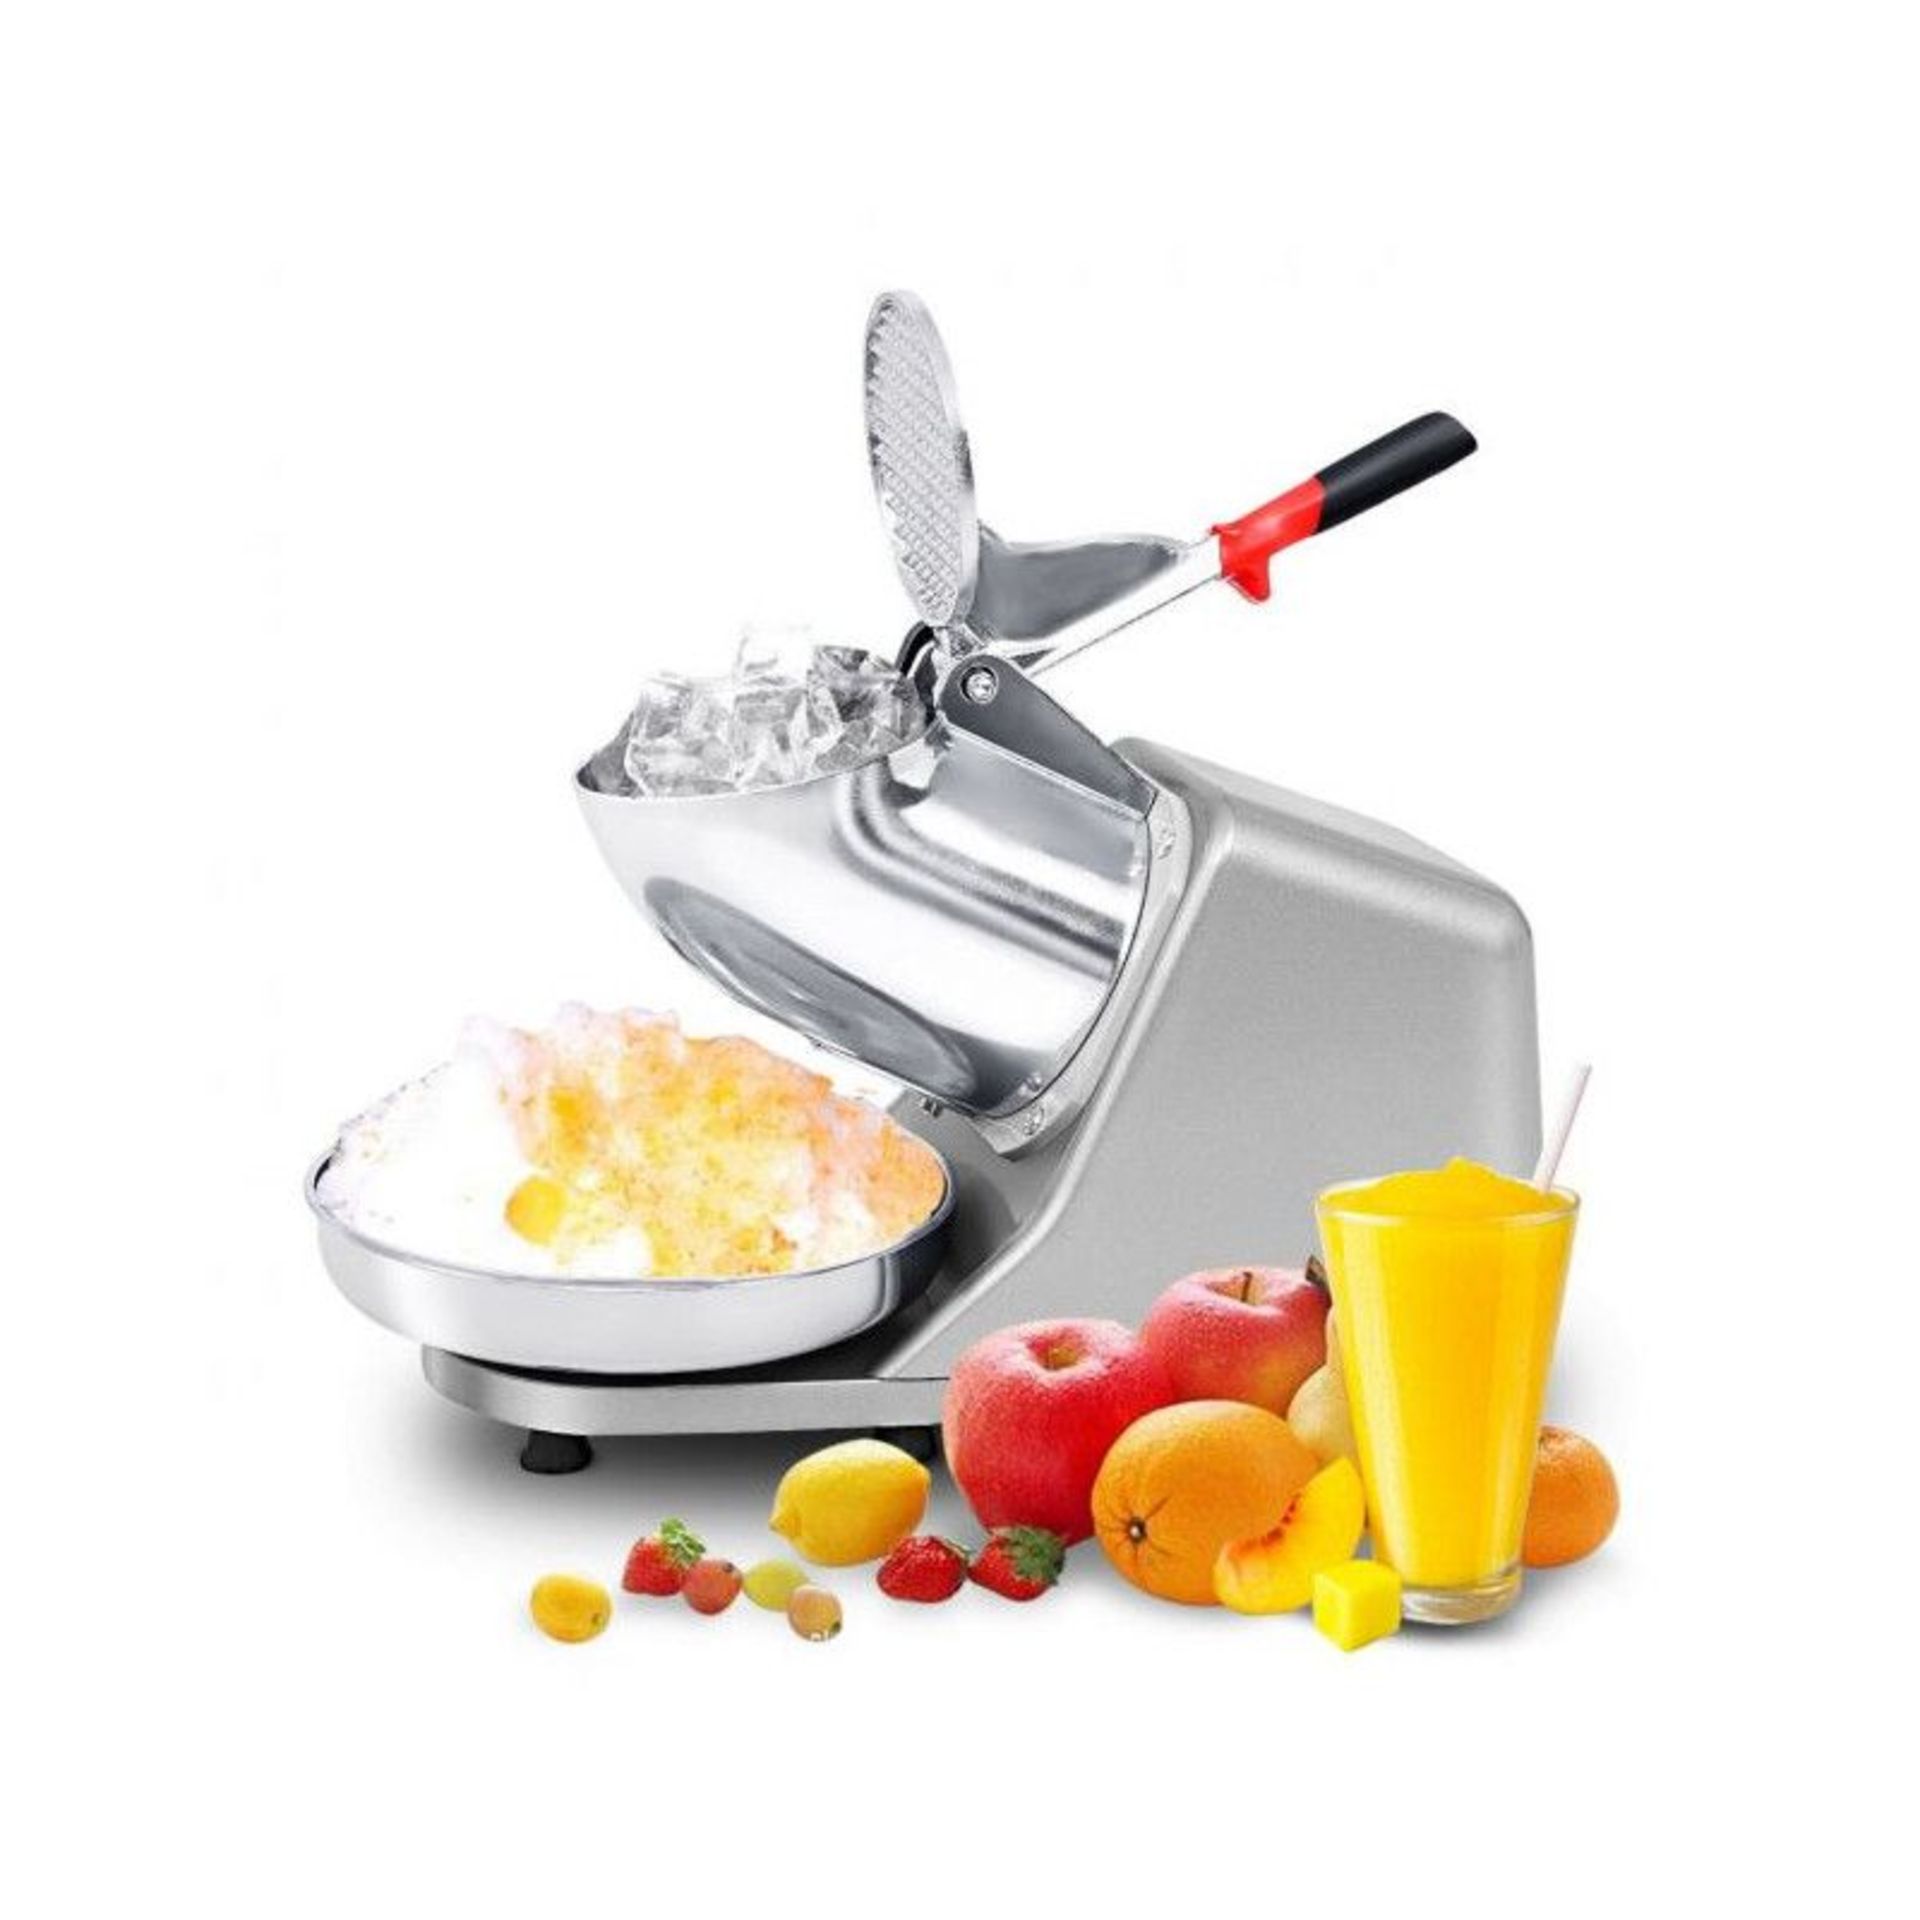 SNOW CONE MAKER STAINLESS STEEL SHAVED ICE MACHINE. - ER53..